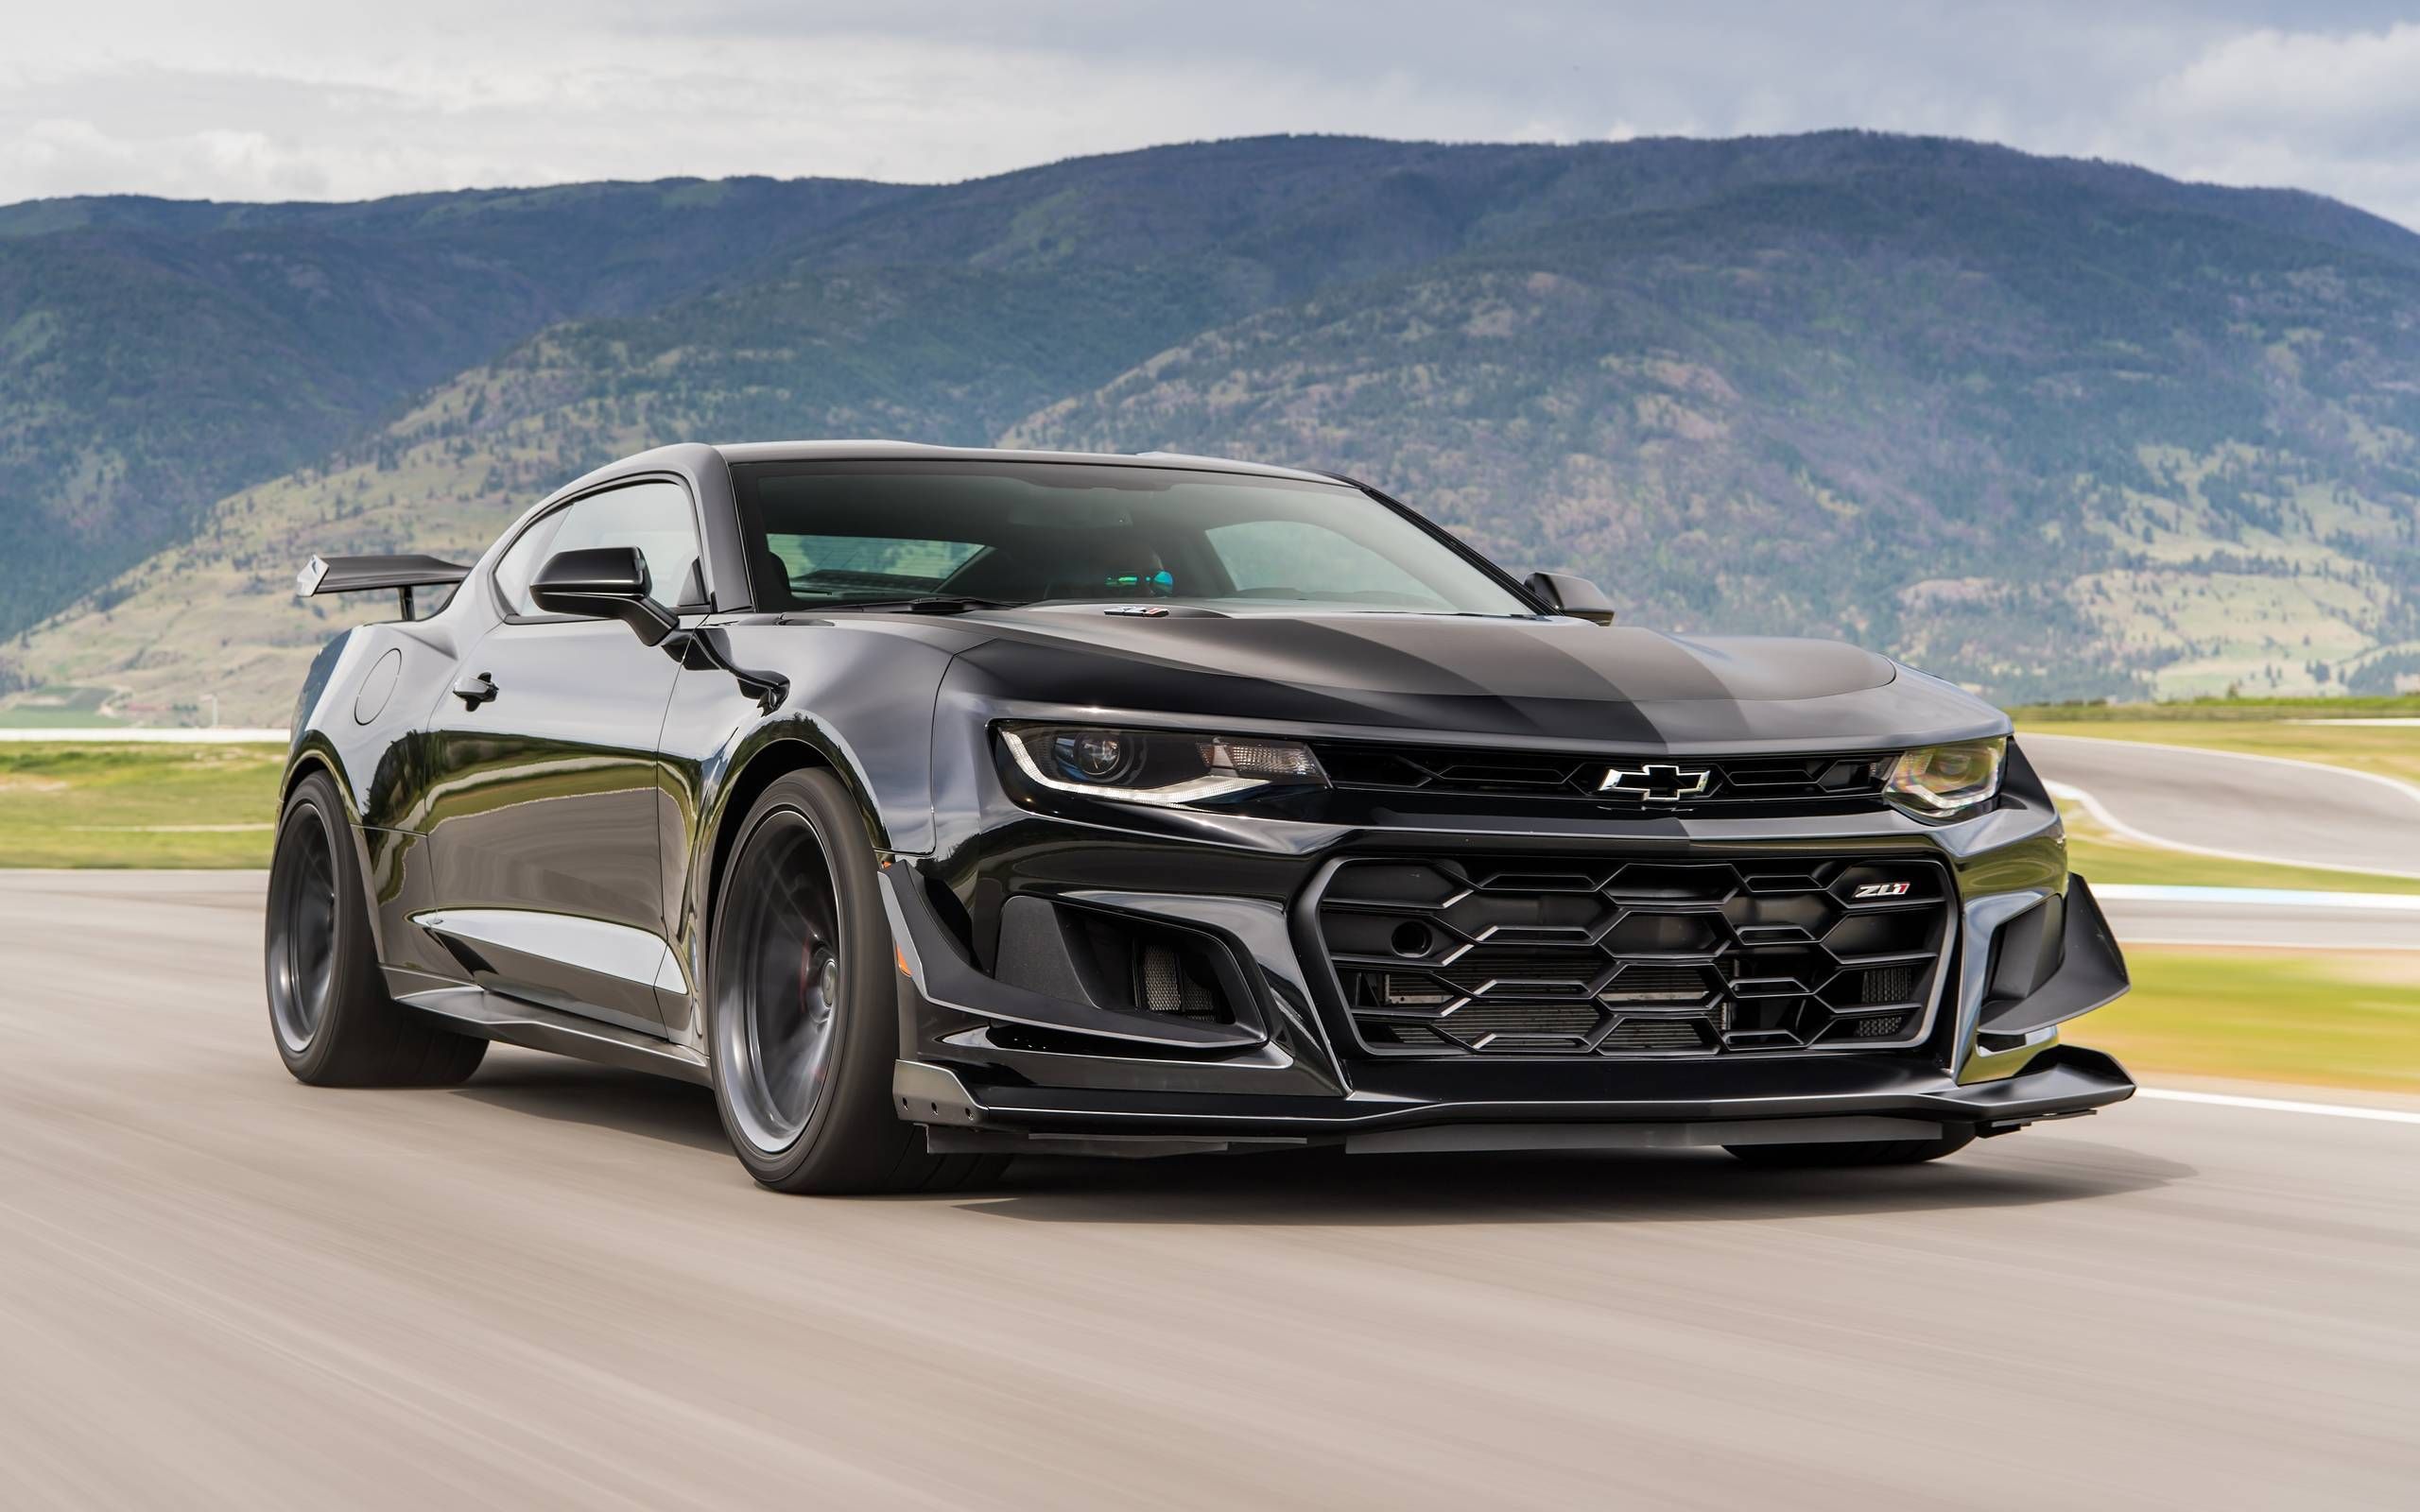 2018 Camaro ZL1 1LE first drive: The ultimate track-ready Camaro